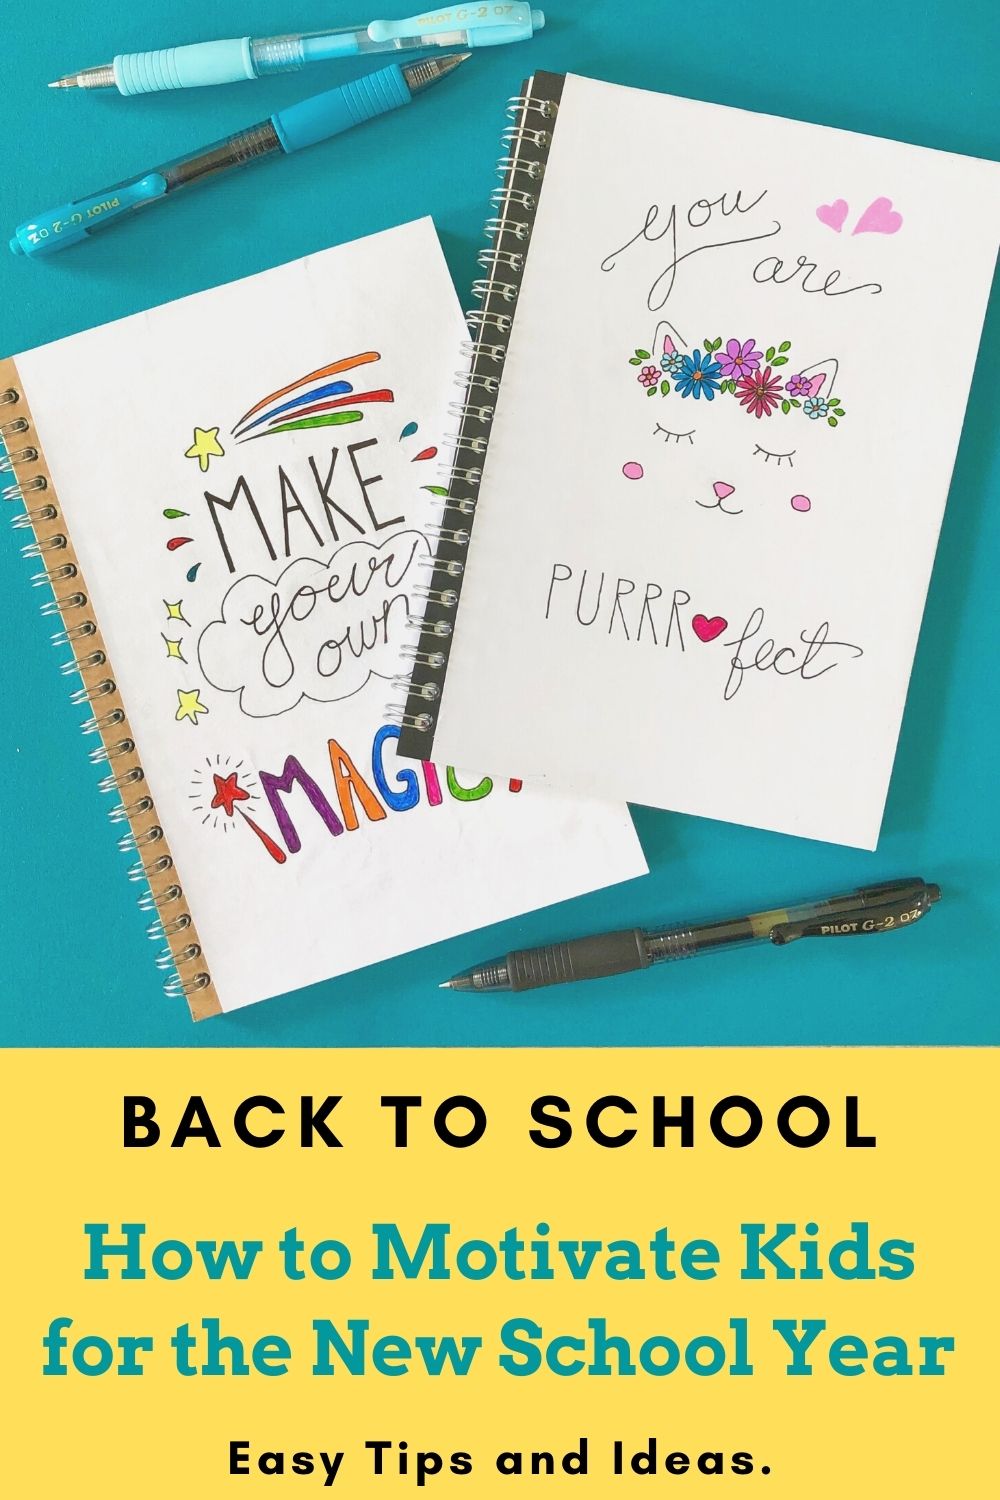 Ideas for motivating kids to get excited to to back to school